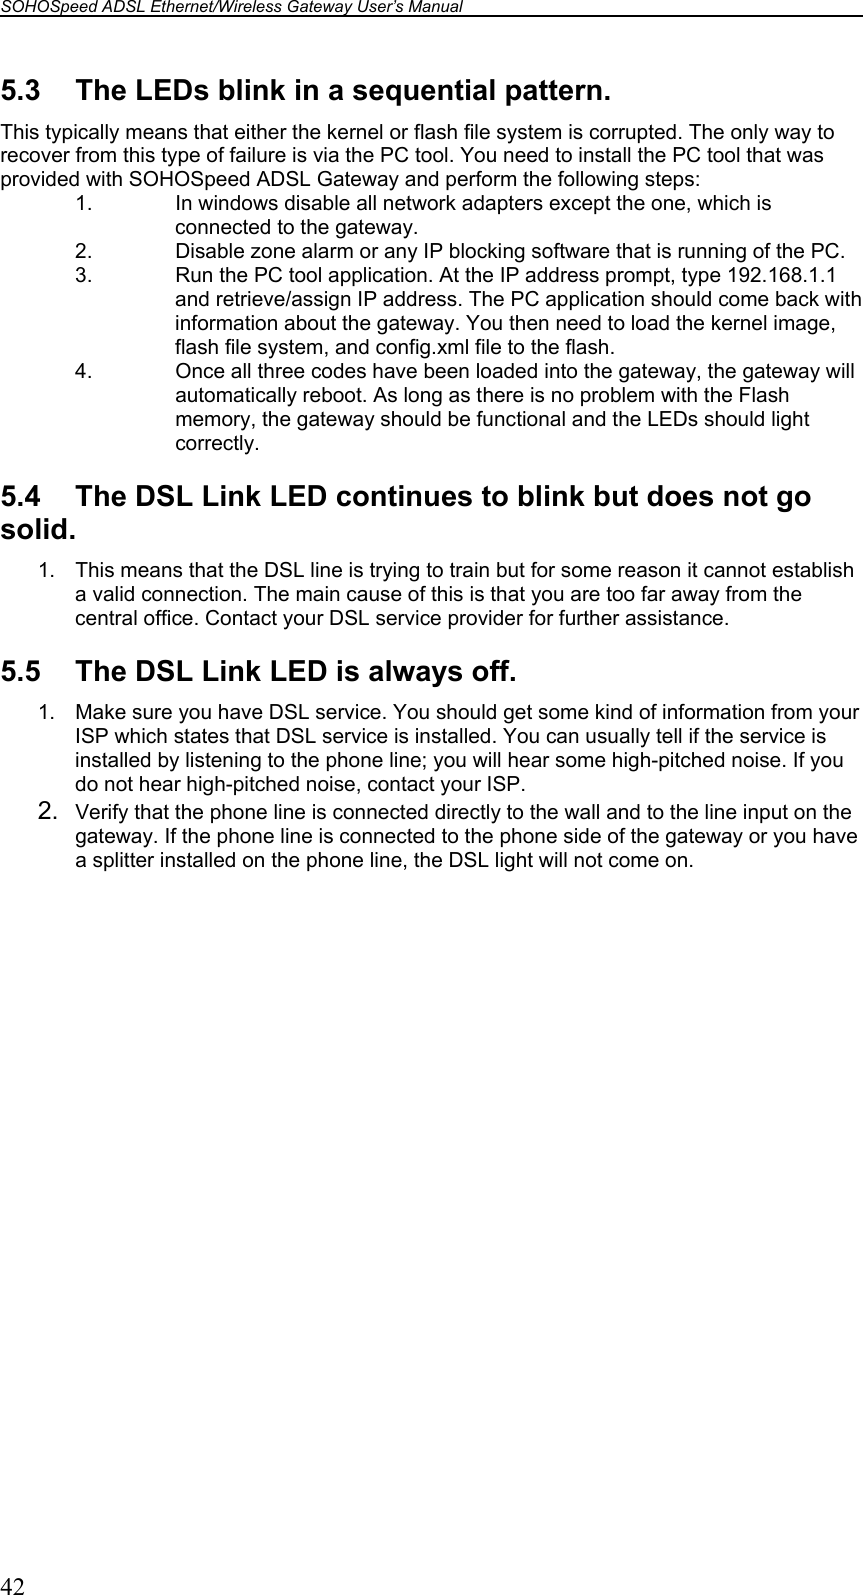 SOHOSpeed ADSL Ethernet/Wireless Gateway User’s Manual    42 5.3  The LEDs blink in a sequential pattern. This typically means that either the kernel or flash file system is corrupted. The only way to recover from this type of failure is via the PC tool. You need to install the PC tool that was provided with SOHOSpeed ADSL Gateway and perform the following steps: 1.  In windows disable all network adapters except the one, which is connected to the gateway. 2.  Disable zone alarm or any IP blocking software that is running of the PC. 3.  Run the PC tool application. At the IP address prompt, type 192.168.1.1 and retrieve/assign IP address. The PC application should come back with information about the gateway. You then need to load the kernel image, flash file system, and config.xml file to the flash. 4.  Once all three codes have been loaded into the gateway, the gateway will automatically reboot. As long as there is no problem with the Flash memory, the gateway should be functional and the LEDs should light correctly.  5.4  The DSL Link LED continues to blink but does not go solid. 1.  This means that the DSL line is trying to train but for some reason it cannot establish a valid connection. The main cause of this is that you are too far away from the central office. Contact your DSL service provider for further assistance.  5.5  The DSL Link LED is always off. 1.  Make sure you have DSL service. You should get some kind of information from your ISP which states that DSL service is installed. You can usually tell if the service is installed by listening to the phone line; you will hear some high-pitched noise. If you do not hear high-pitched noise, contact your ISP. 2.  Verify that the phone line is connected directly to the wall and to the line input on the gateway. If the phone line is connected to the phone side of the gateway or you have a splitter installed on the phone line, the DSL light will not come on.  